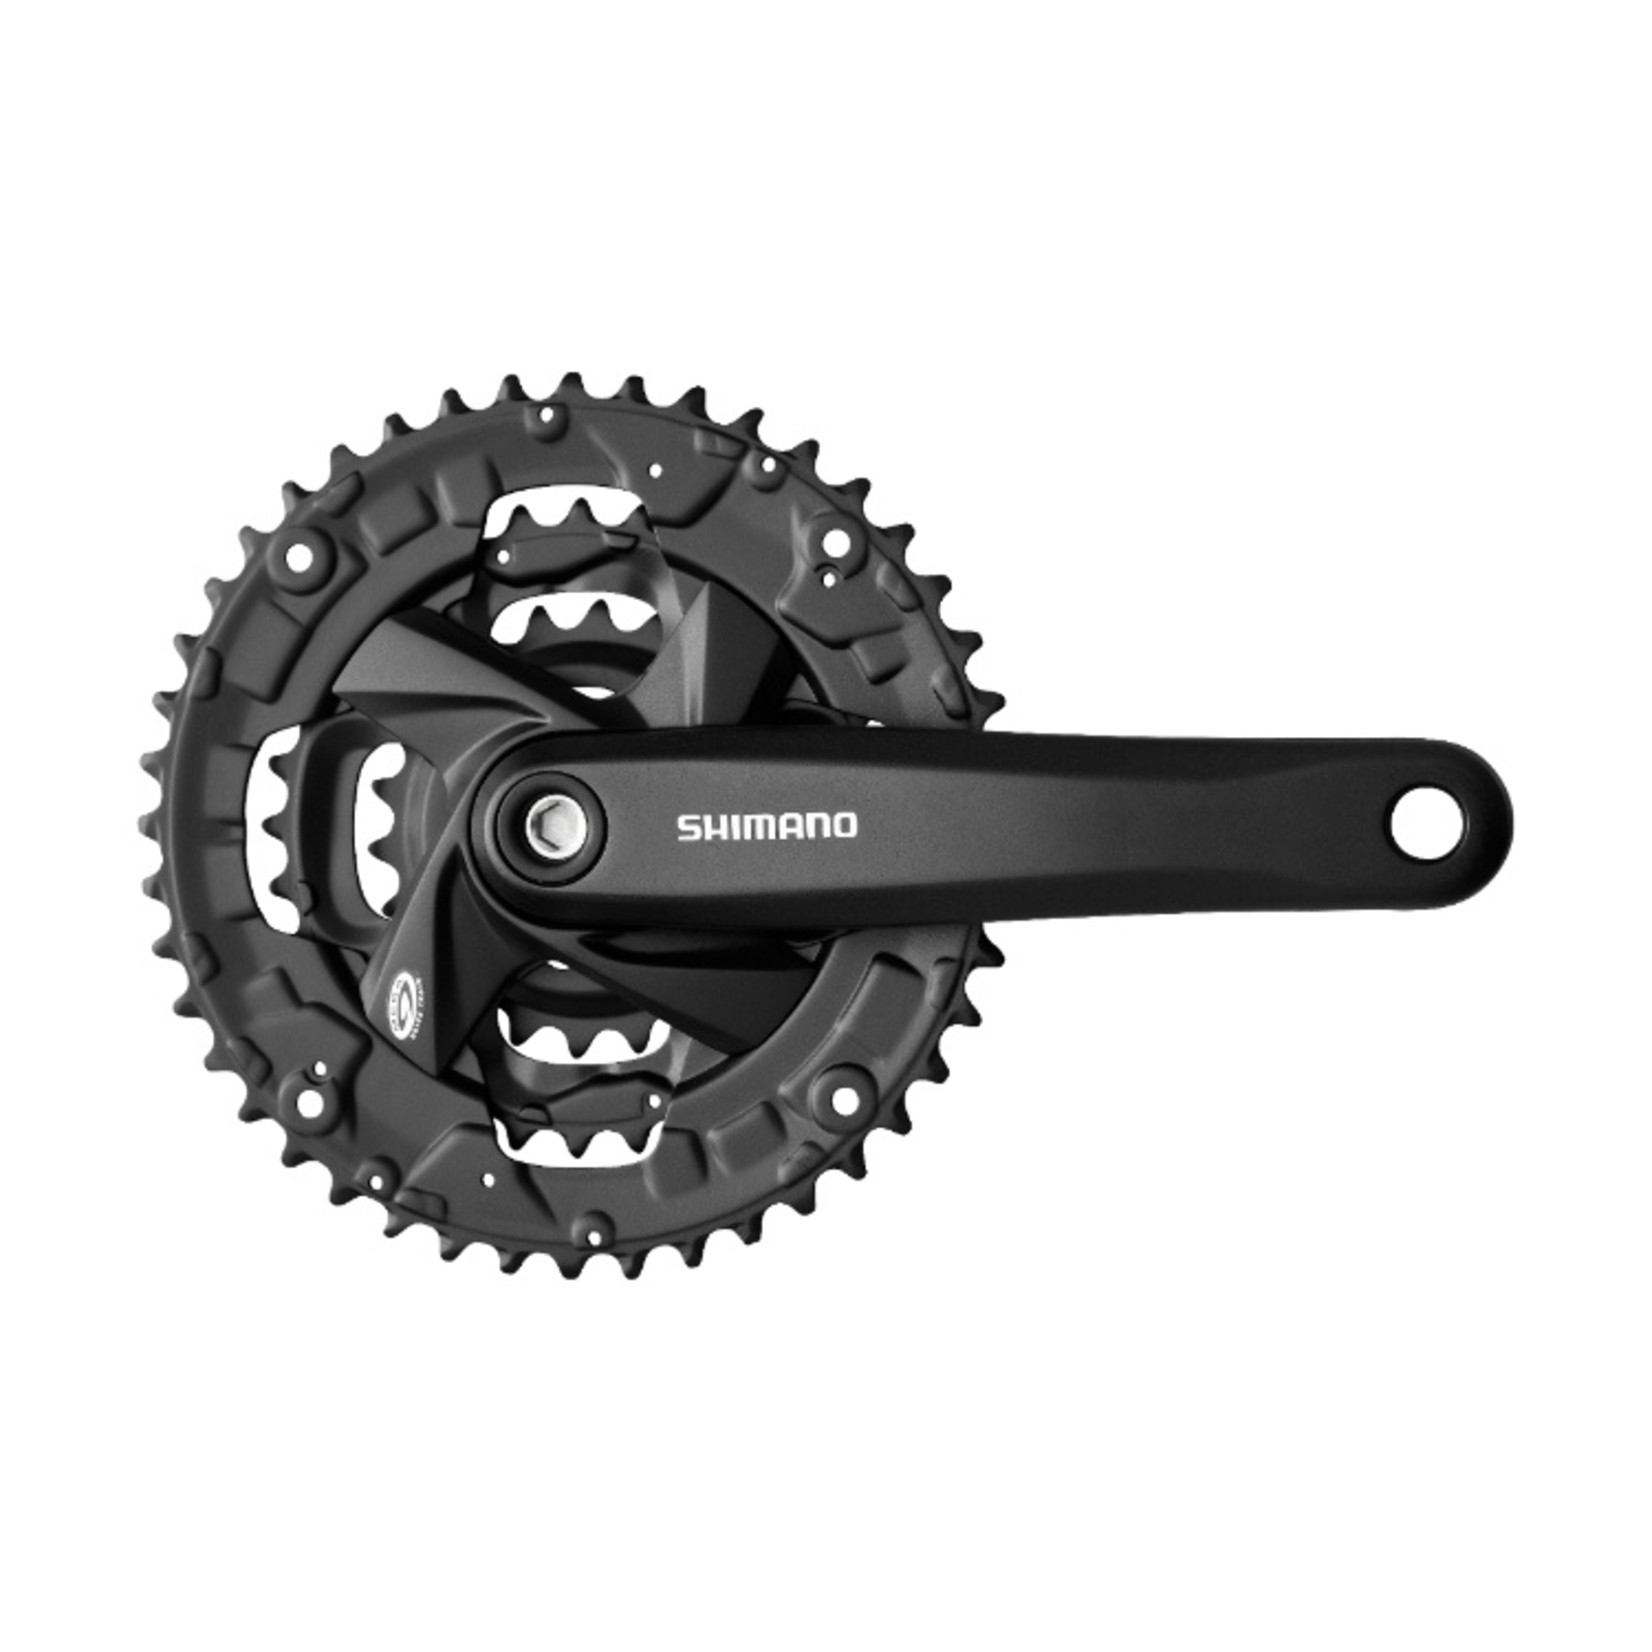 Shimano SHIMANO FC-M371 CHAINSET 9 SPEED